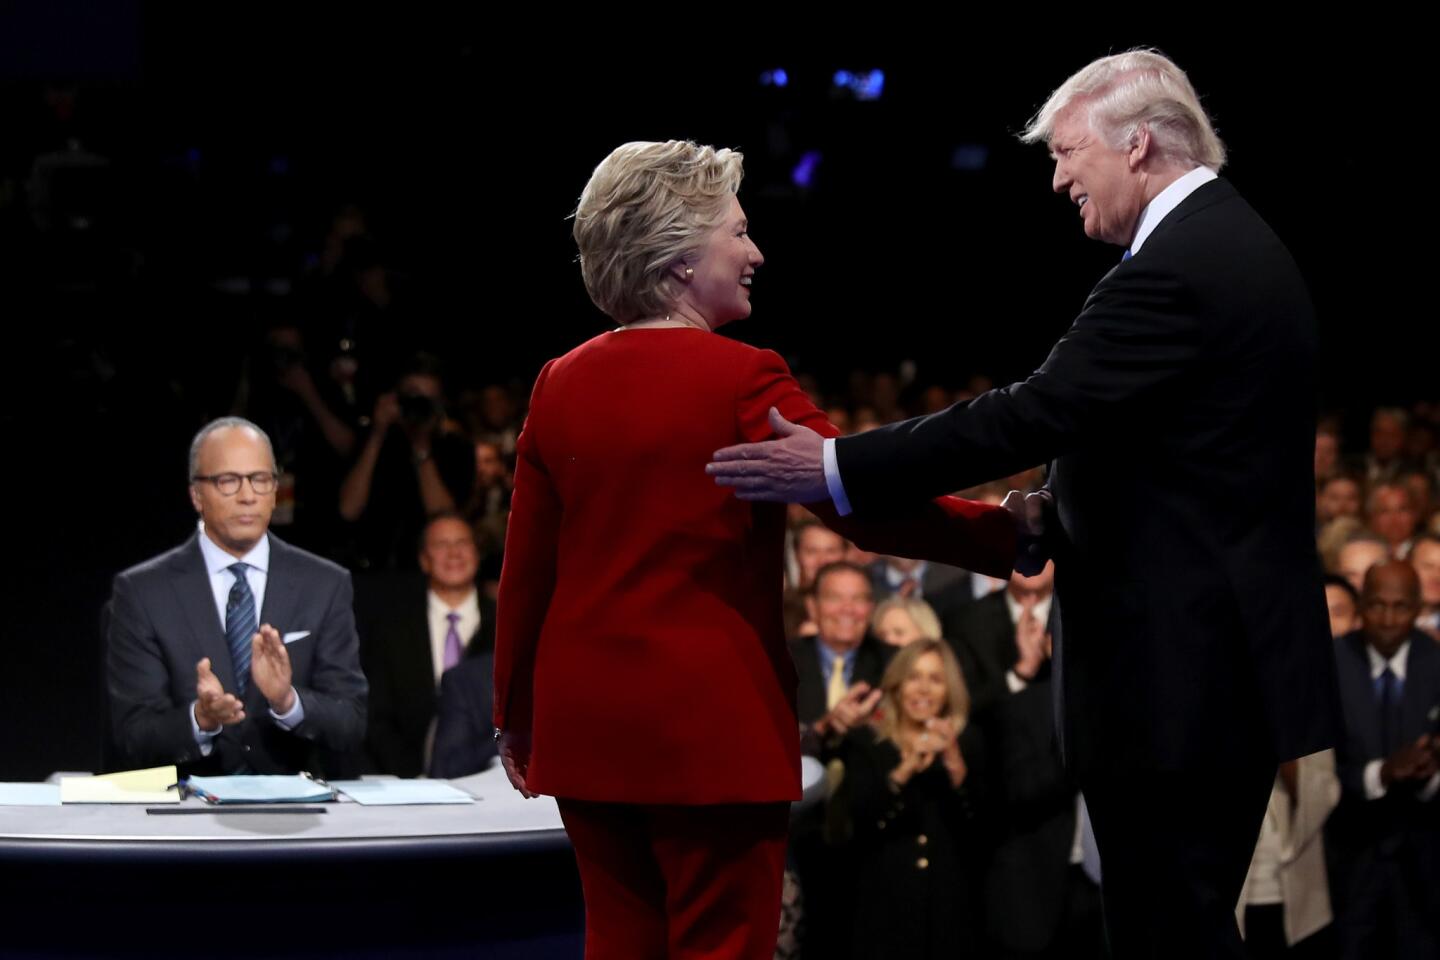 Hillary Clinton shakes hands with Donald Trump as moderator Lester Holt looks on during the presidential debate at Hofstra University on Sept. 26, 2016, in Hempstead, New York.